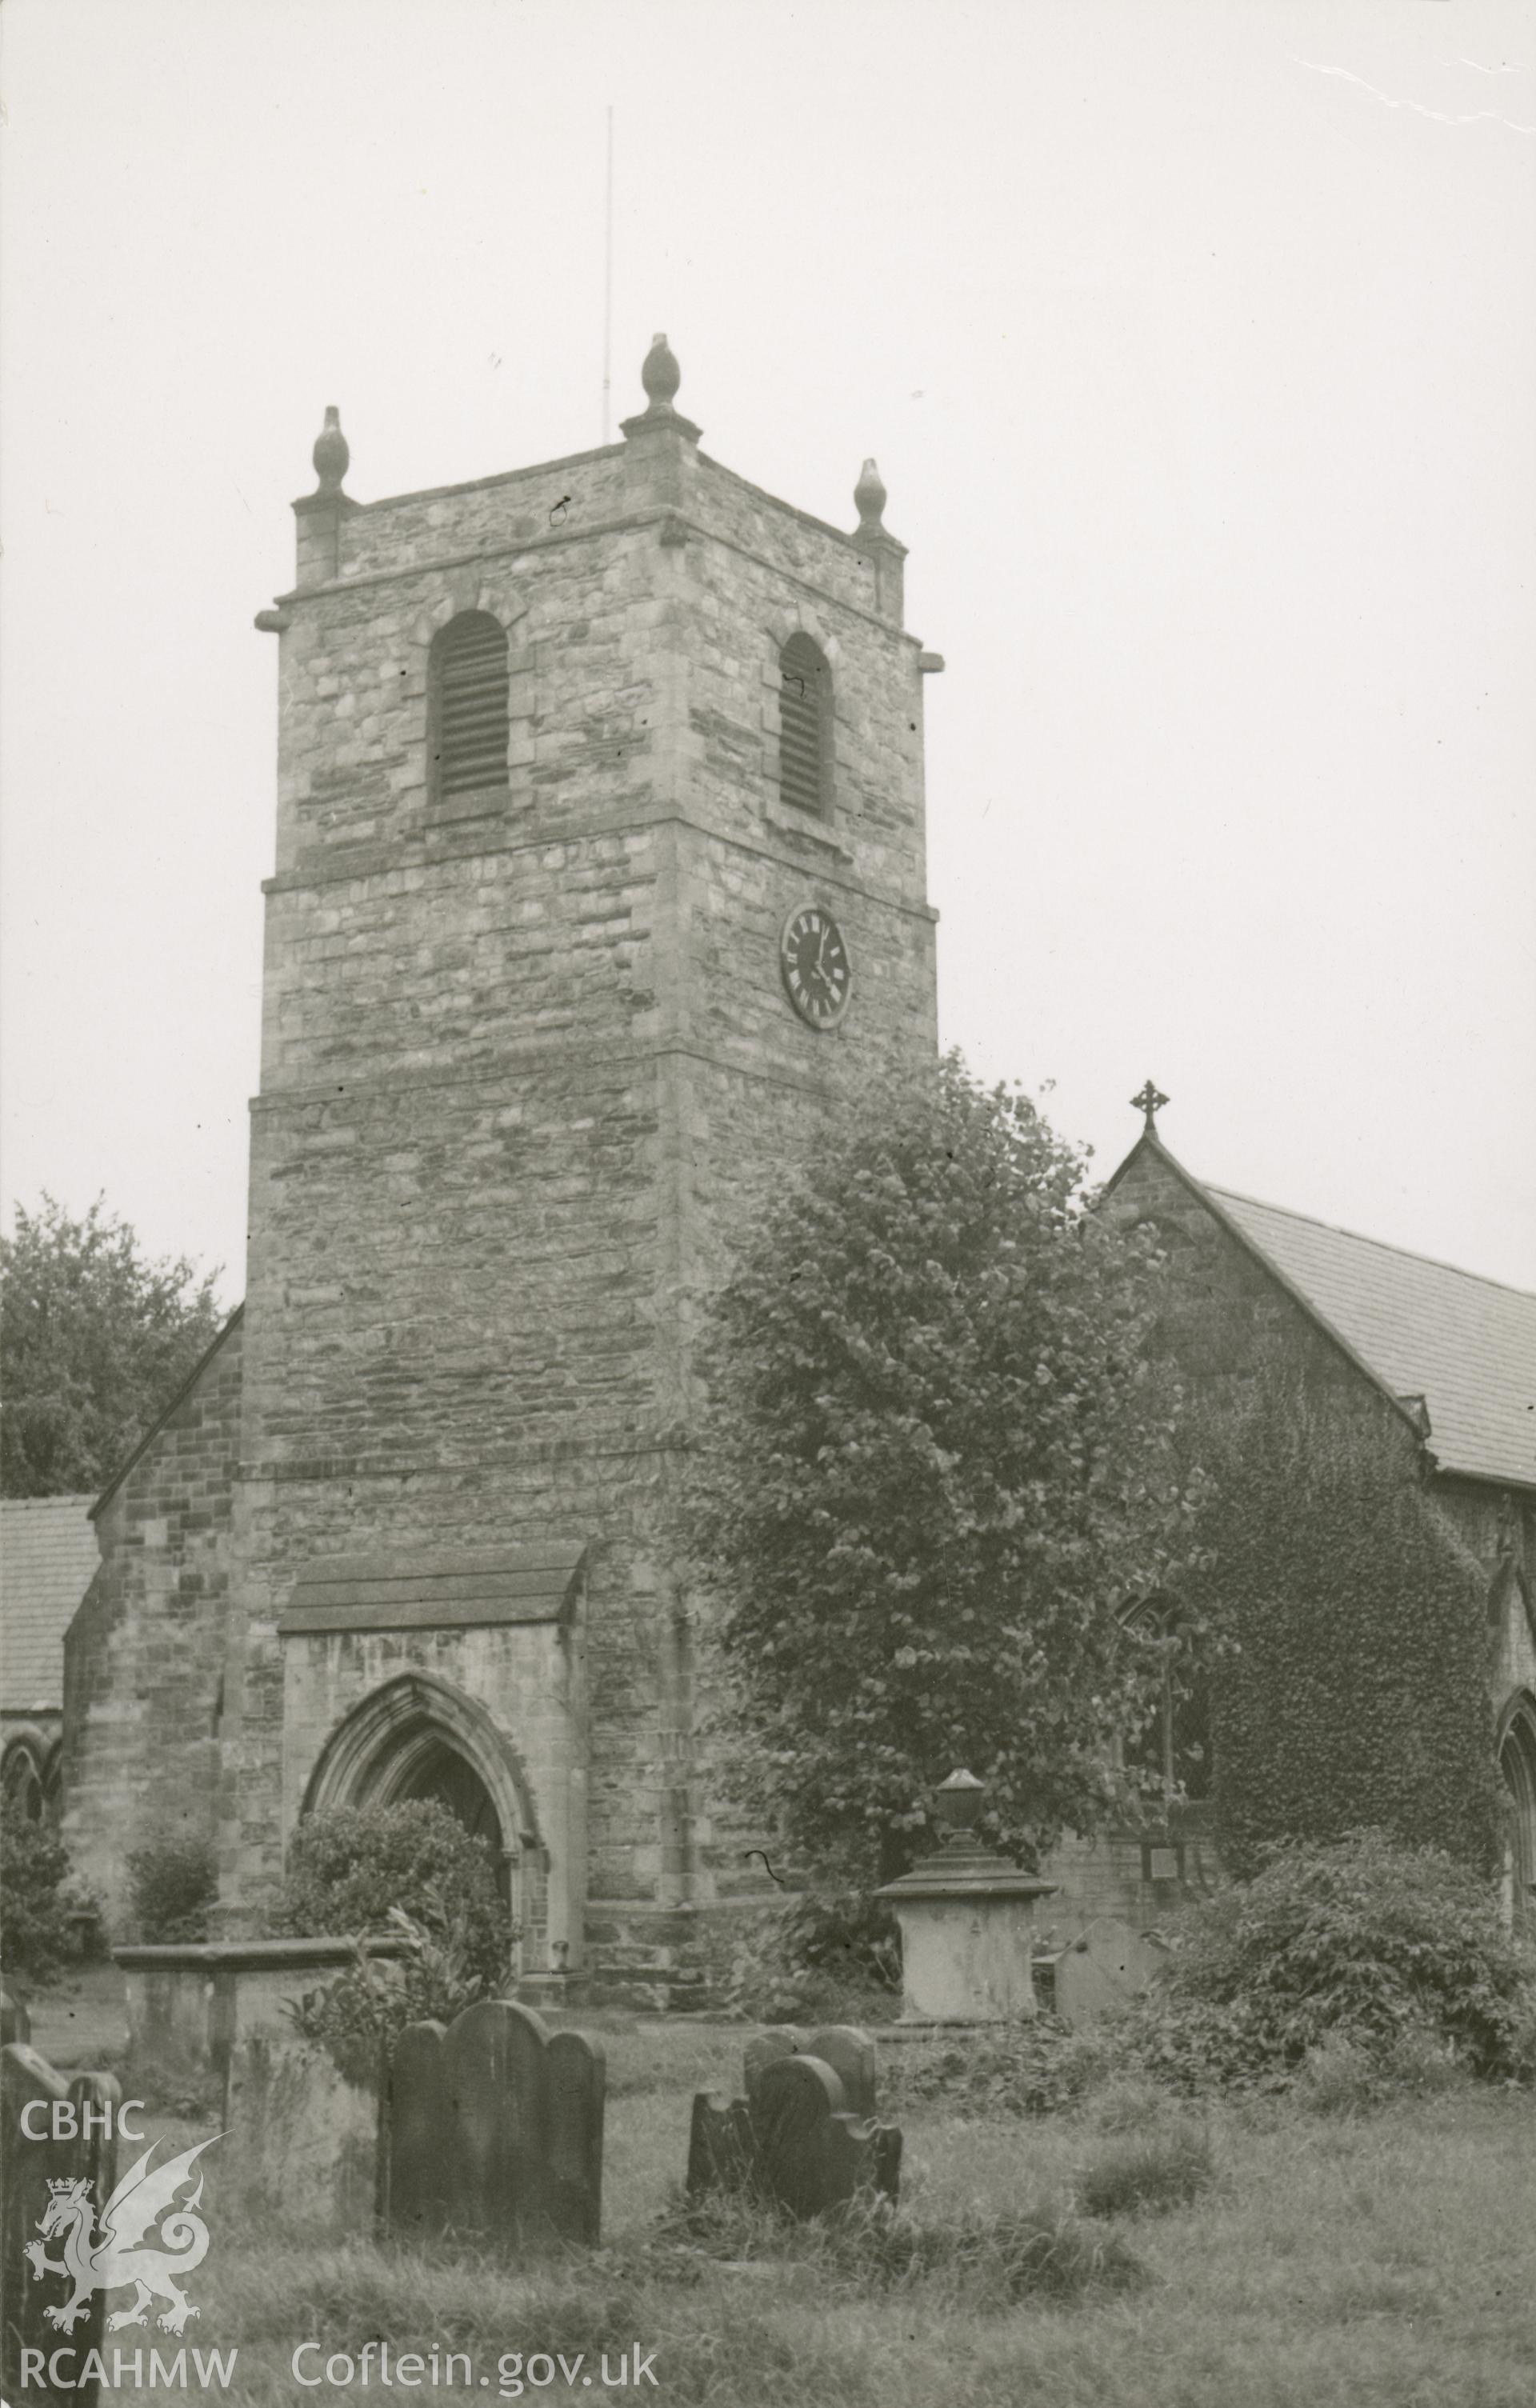 Digital copy of of a black and white photo showing an exterior view of St Collen's Church taken by P.G.M. Dickinson, c.1965